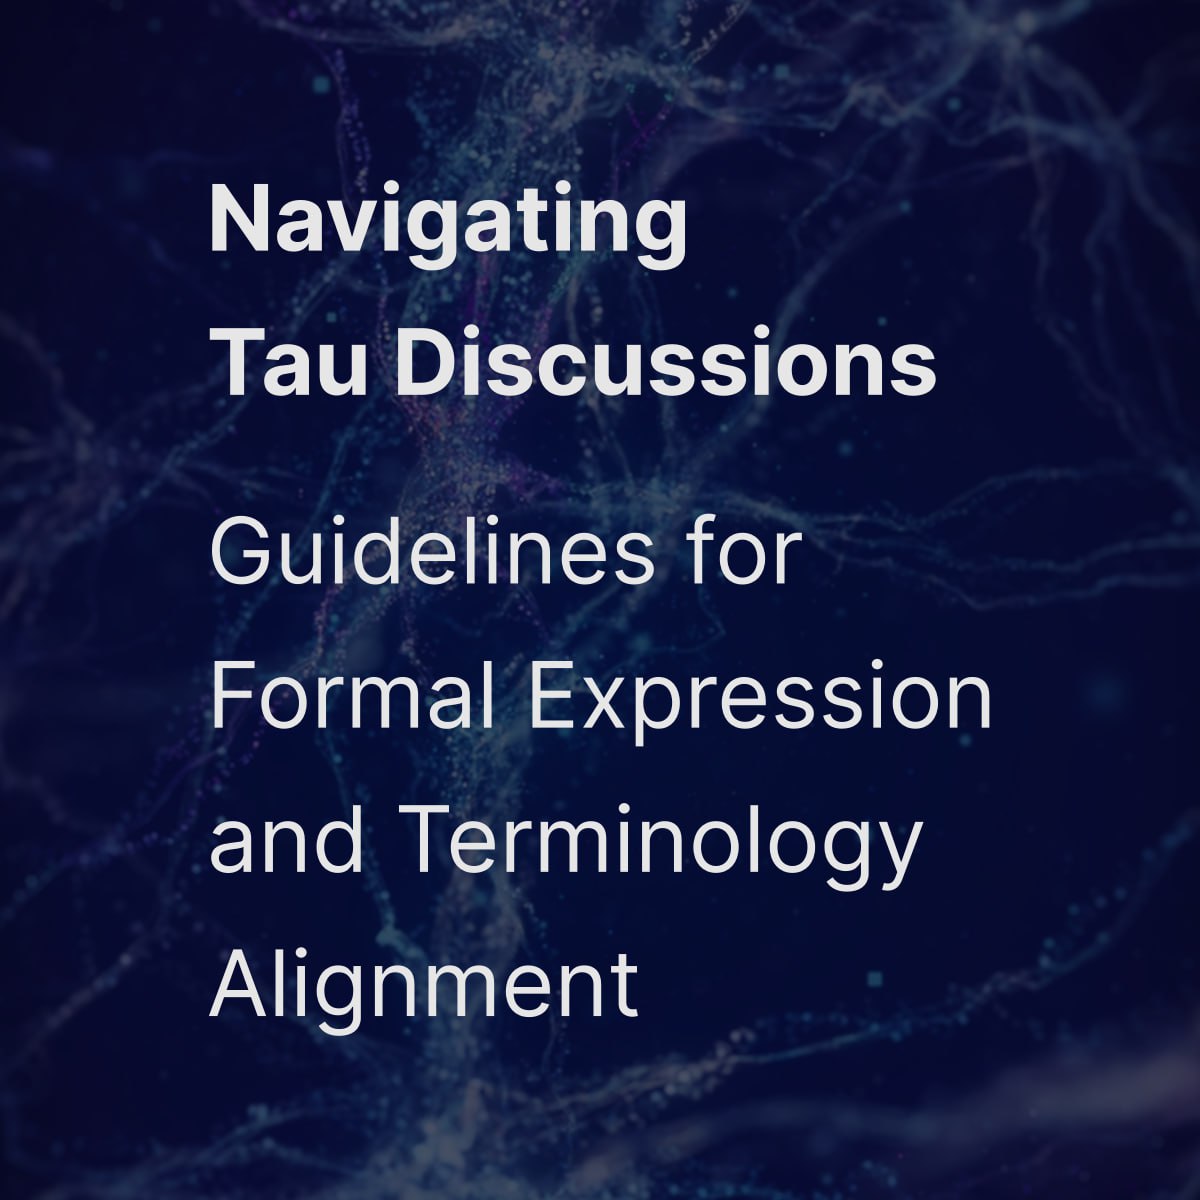 Navigating Tau Discussions 💎
🎥 youtu.be/0jMrjMIYhUc  👈 

Dive into Tau's formal discussions: master precision, align terminologies, amplify your voice in AI. 🌐✨ @TauLogicAI #Taunet #Tau $agrs #formaldiscussions